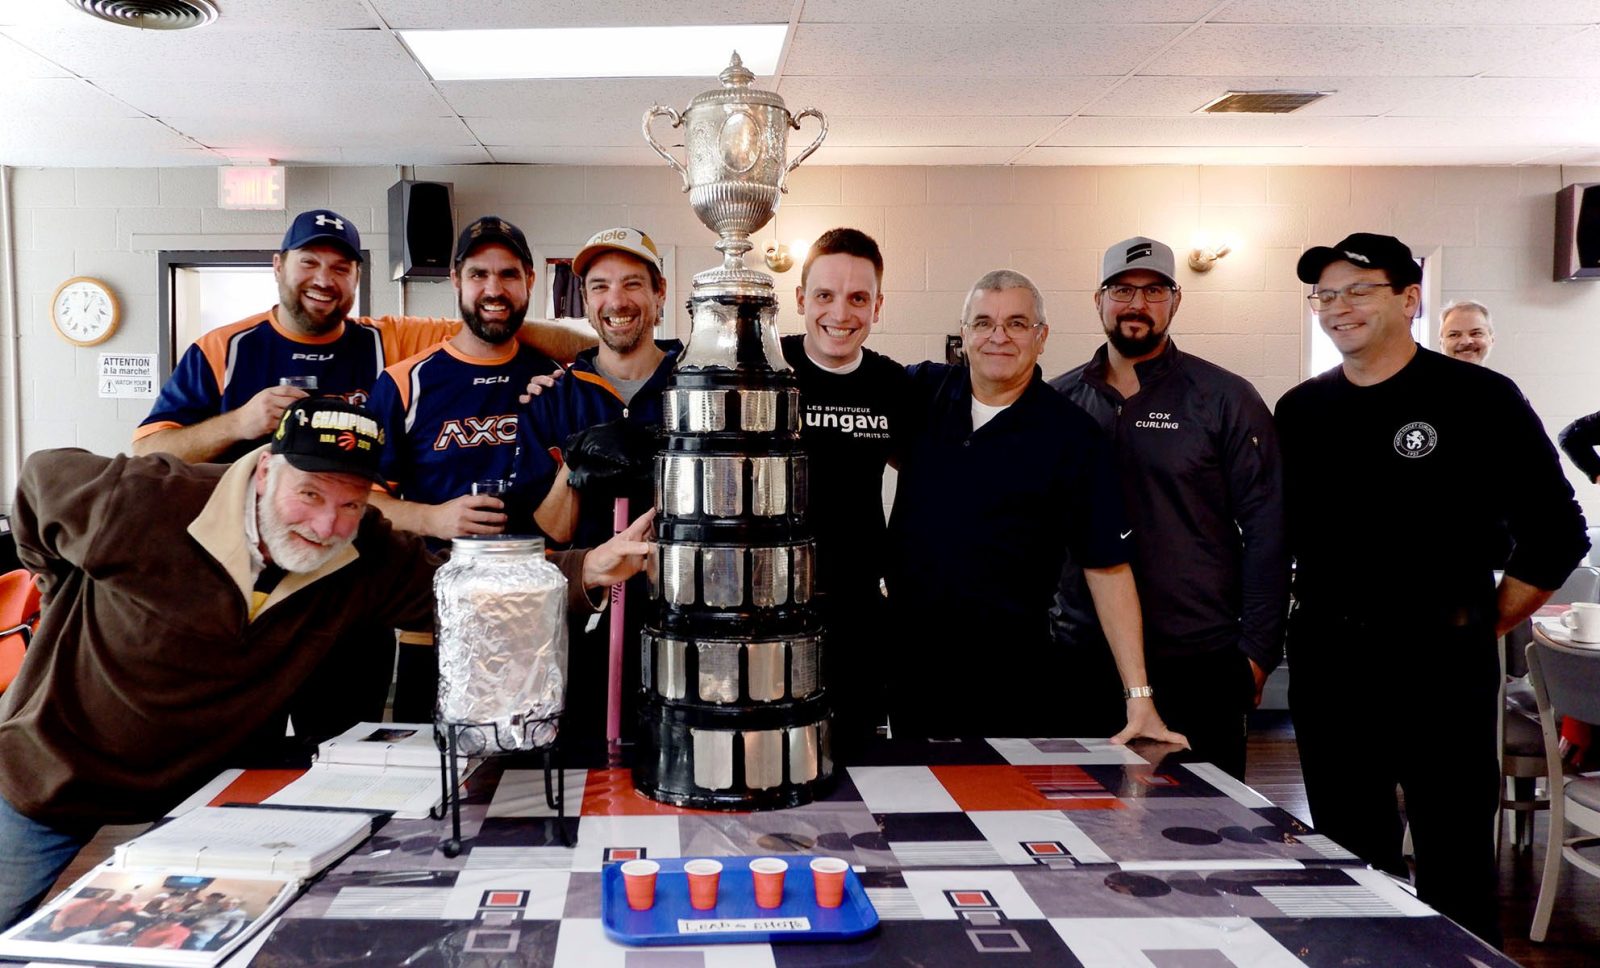 North Hatley Curling Club defends Quebec Challenge Cup on Sunday